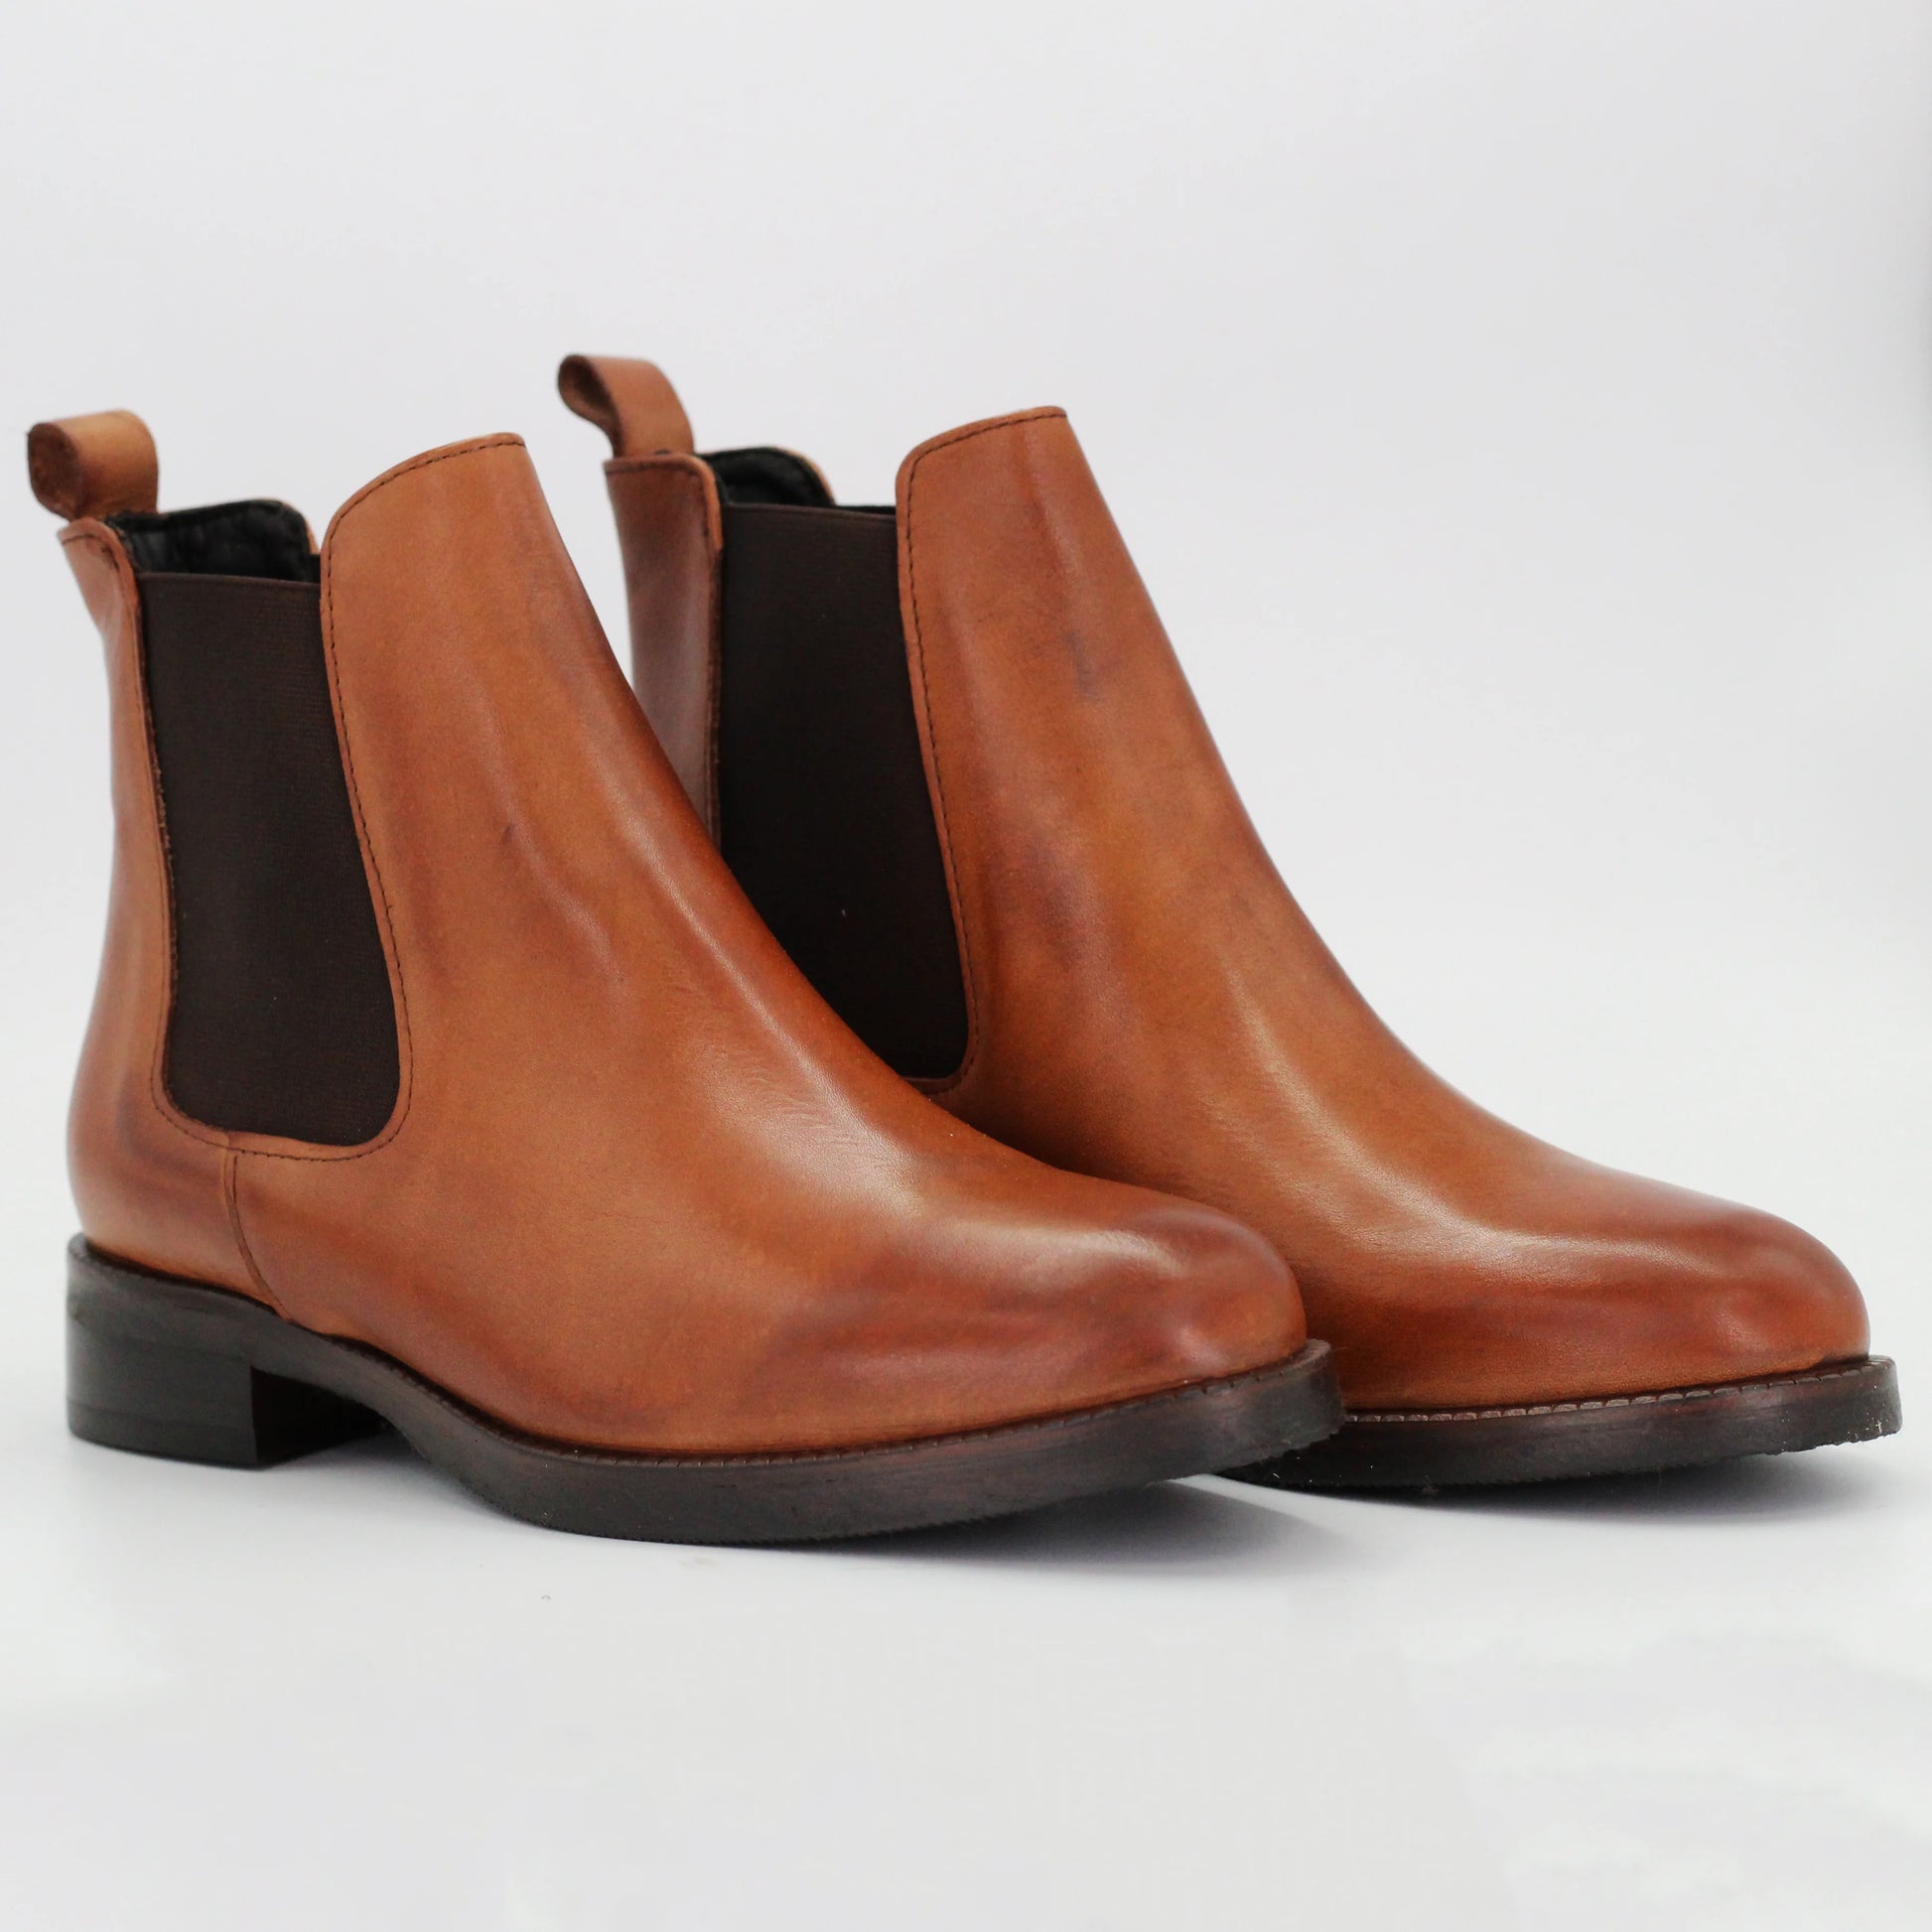 Shop Handmade Italian Leather helsea boot in cuoio (GC2030) or browse our range of hand-made Italian shoes in leather or suede in-store at Aliverti Cape Town, or shop online. We deliver in South Africa & offer multiple payment plans as well as accept multiple safe & secure payment methods.